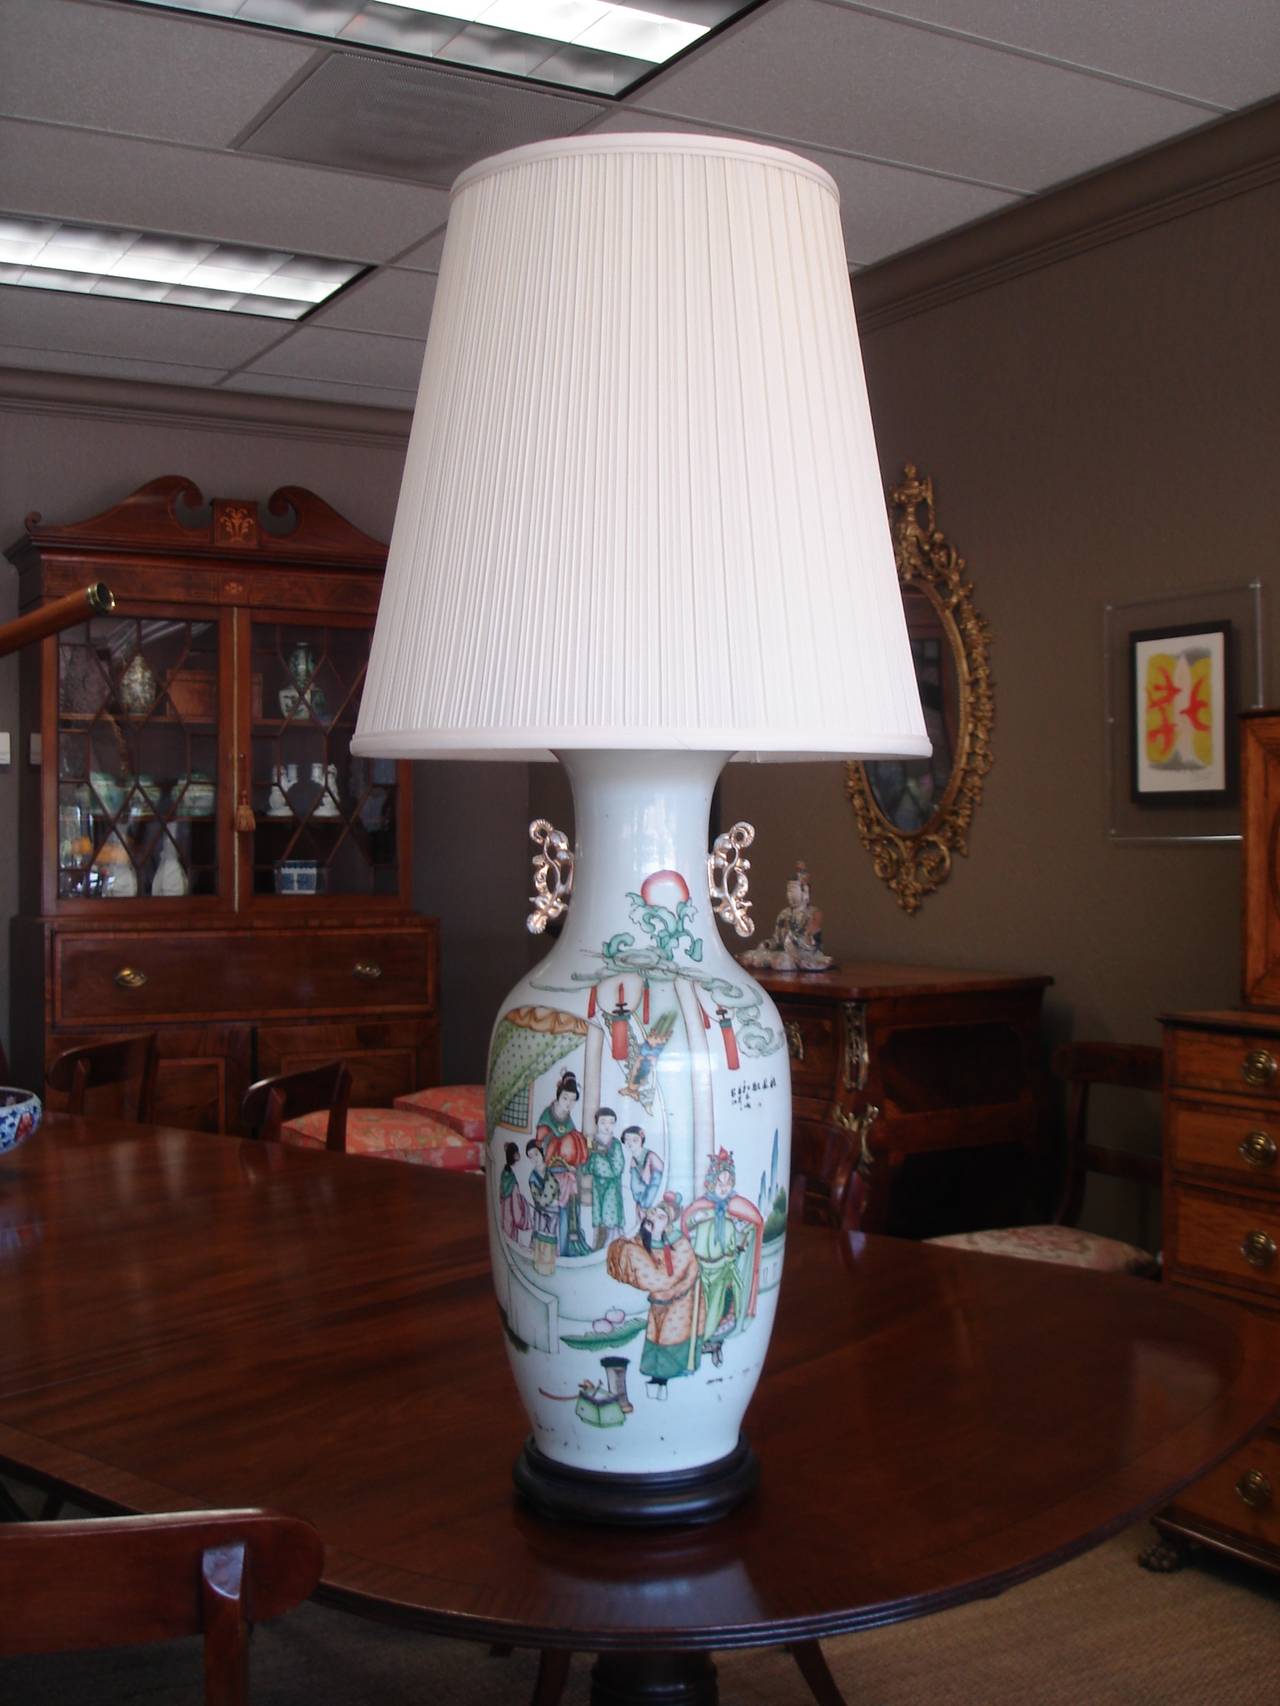 Chinese enameled porcelain baluster vase, with waisted neck supporting gilt porcelain handles formed as stylized temple dogs, over an ovoid body. Now drilled and mounted as a table lamp. The front with scholars in courtly pursuits, the reverse with